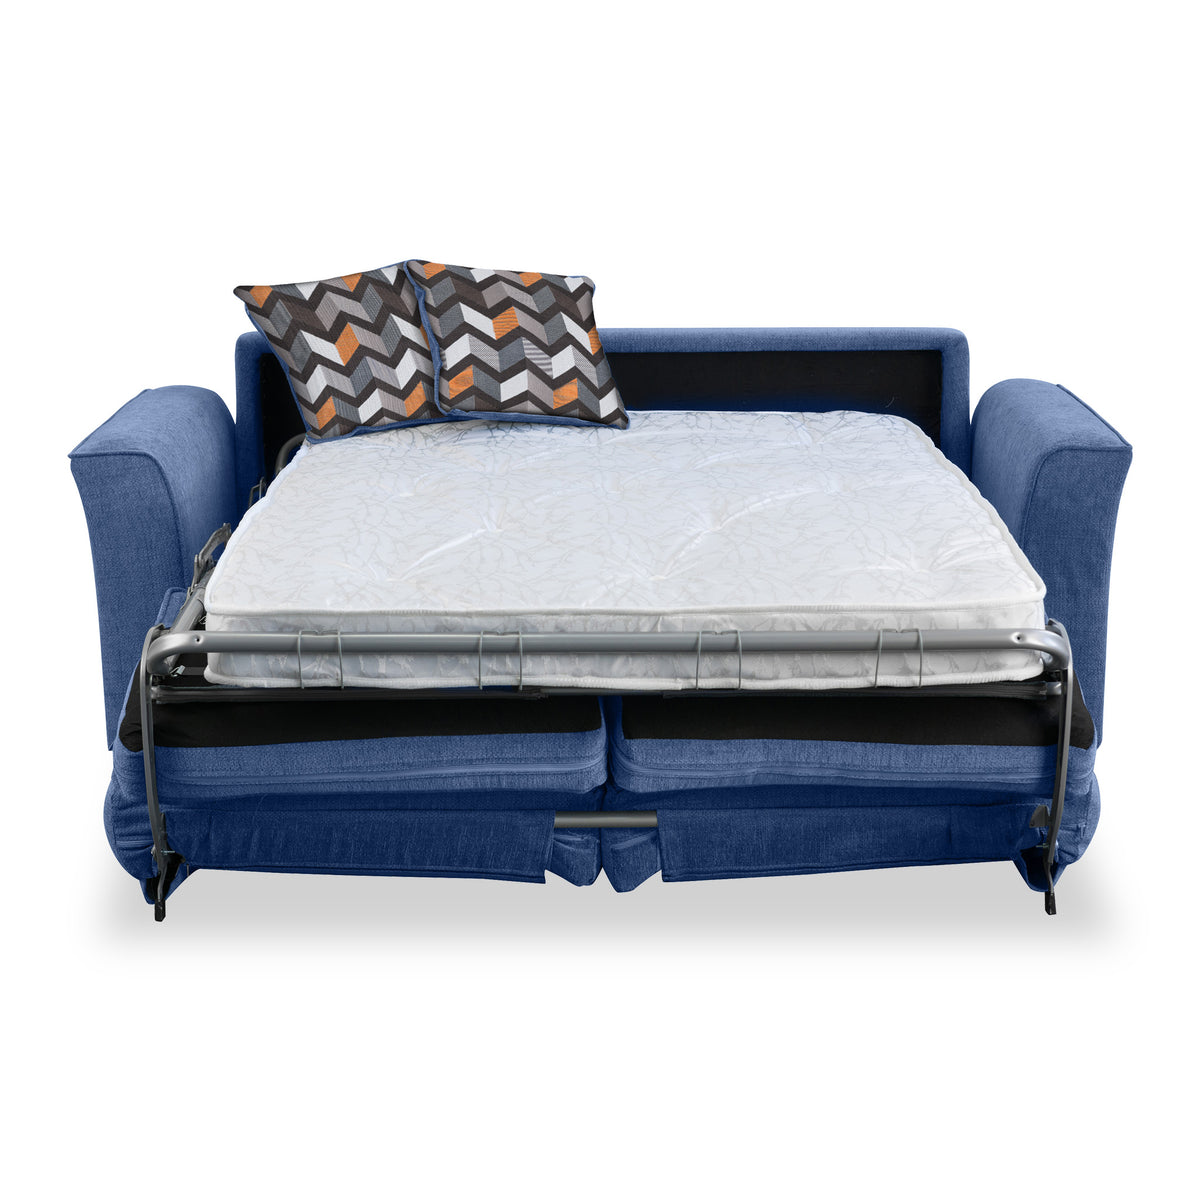 Abbott 2 Seater Sofabed in Denim with Morelisa Charcoal Cushions by Roseland Furniture